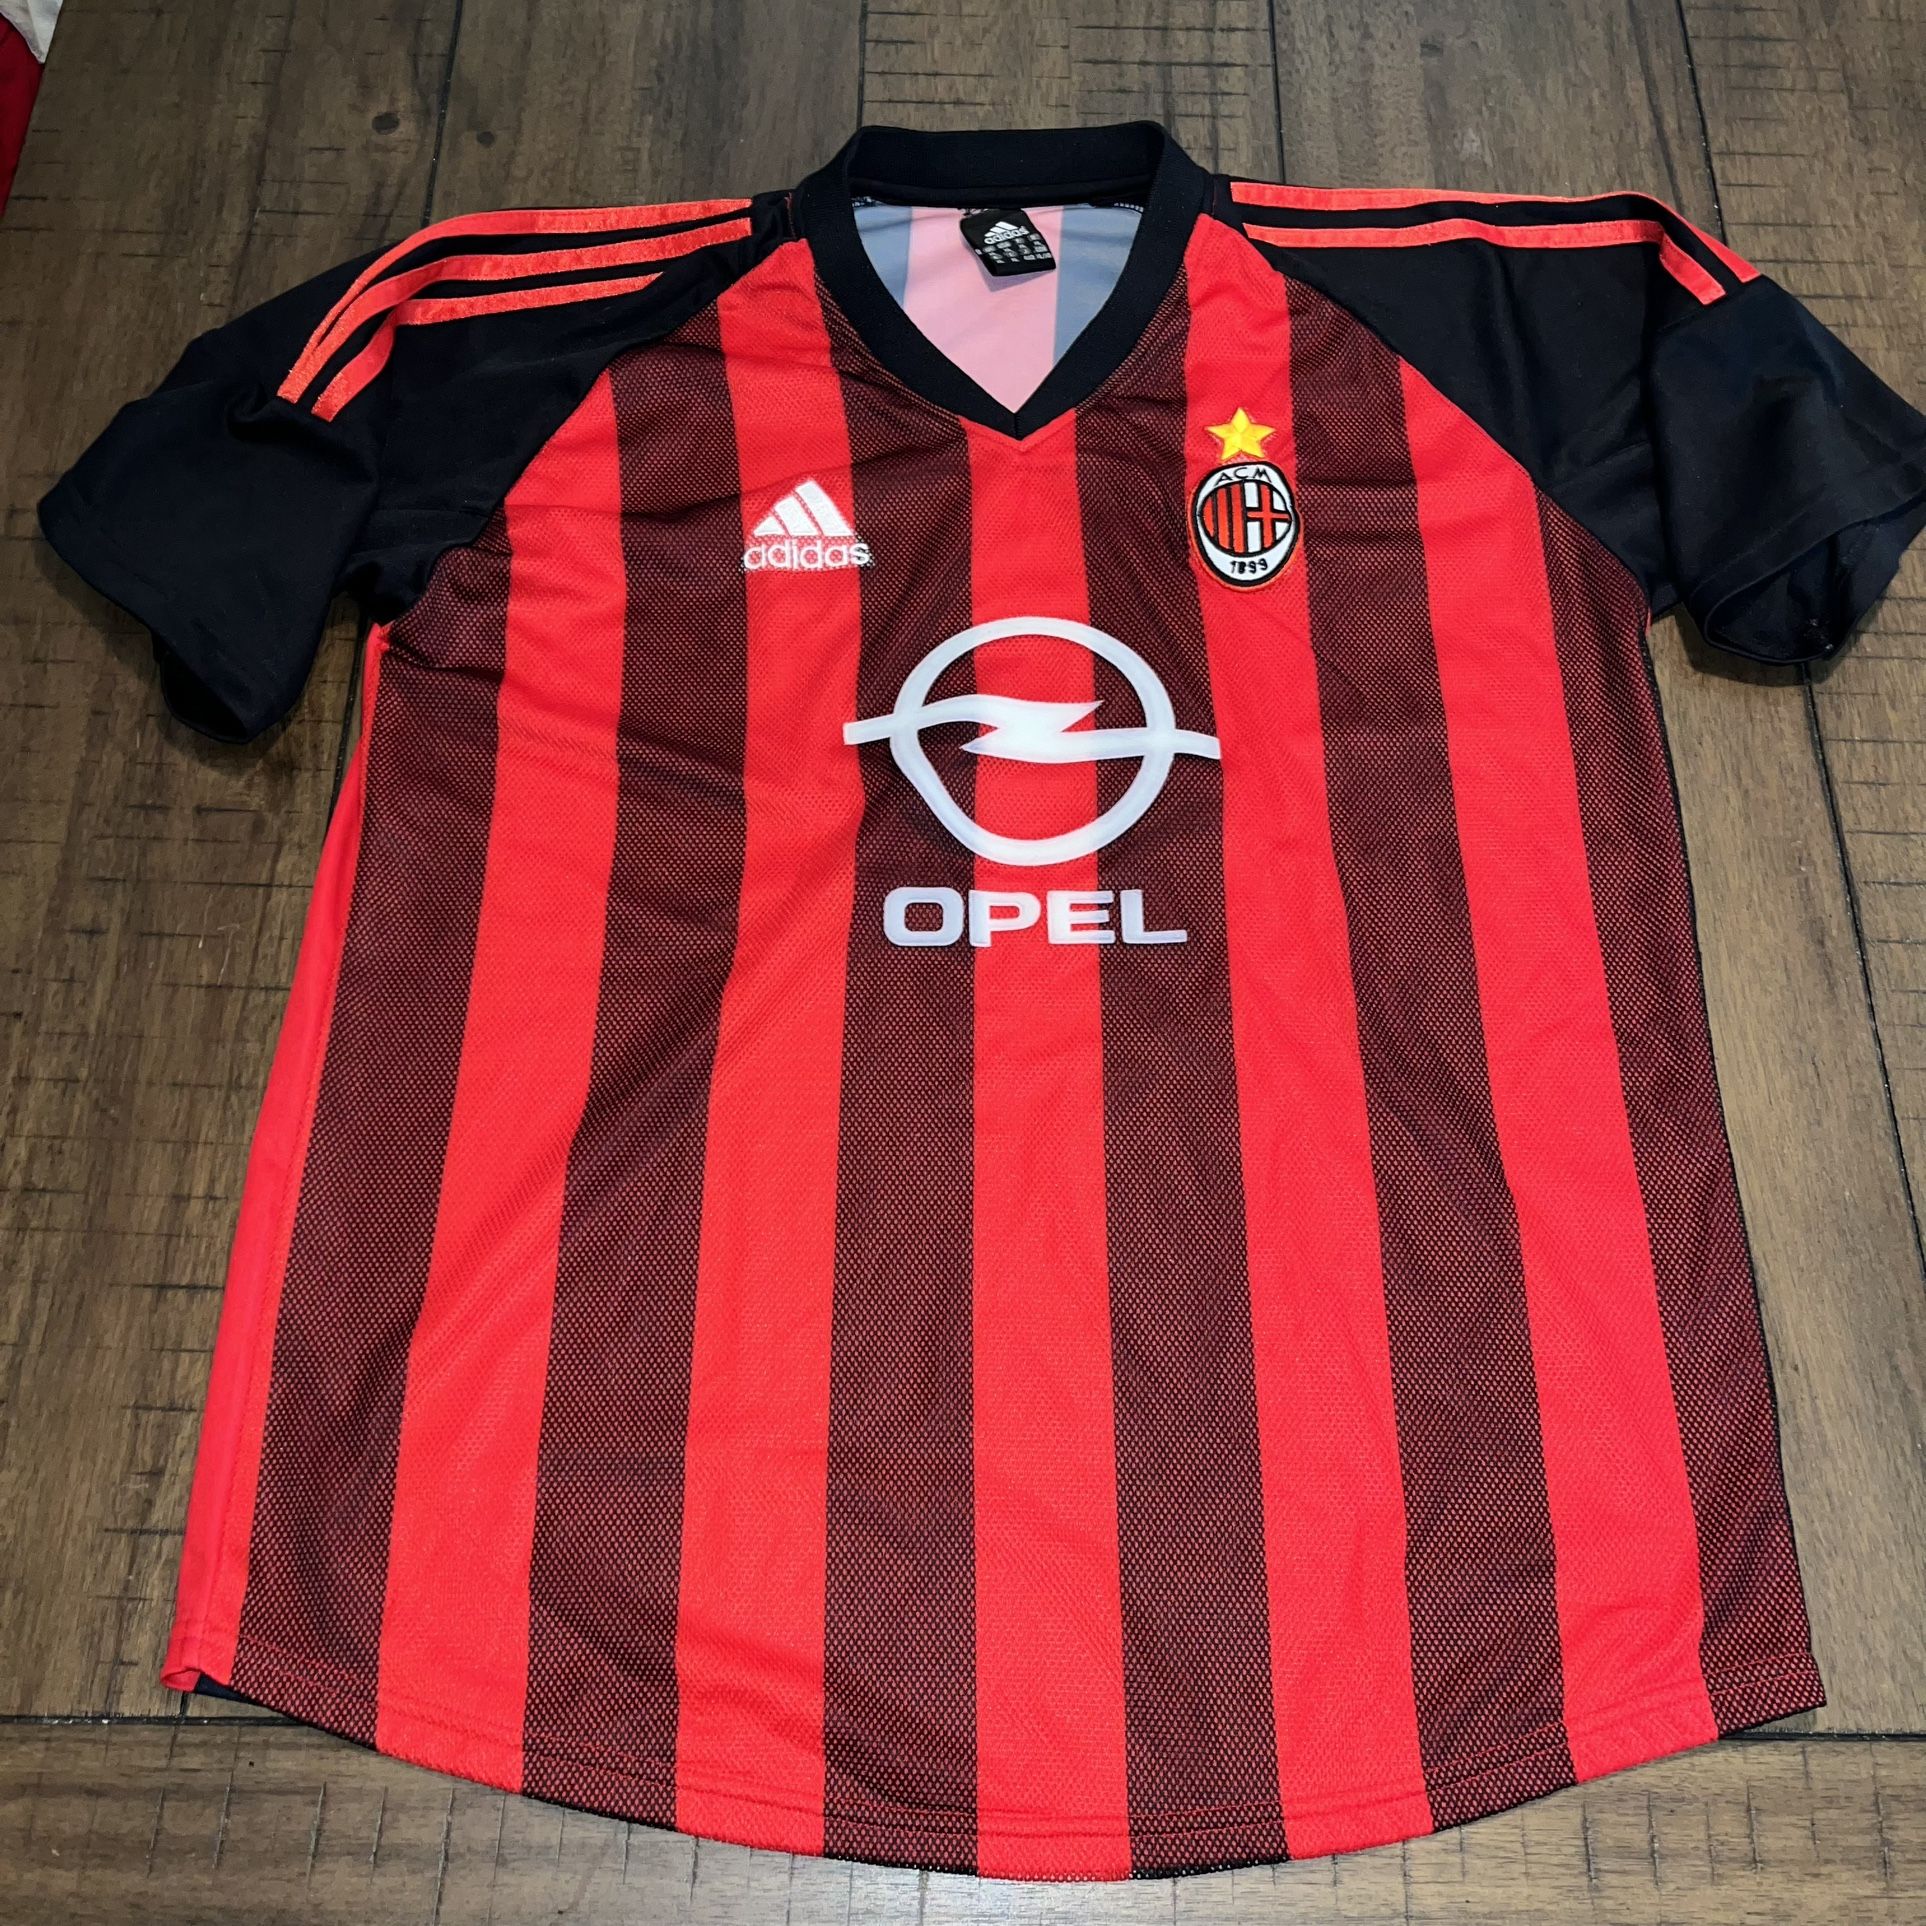 AC Milan ACM 1(contact info removed) Adidas Men's Opel Jersey size XL